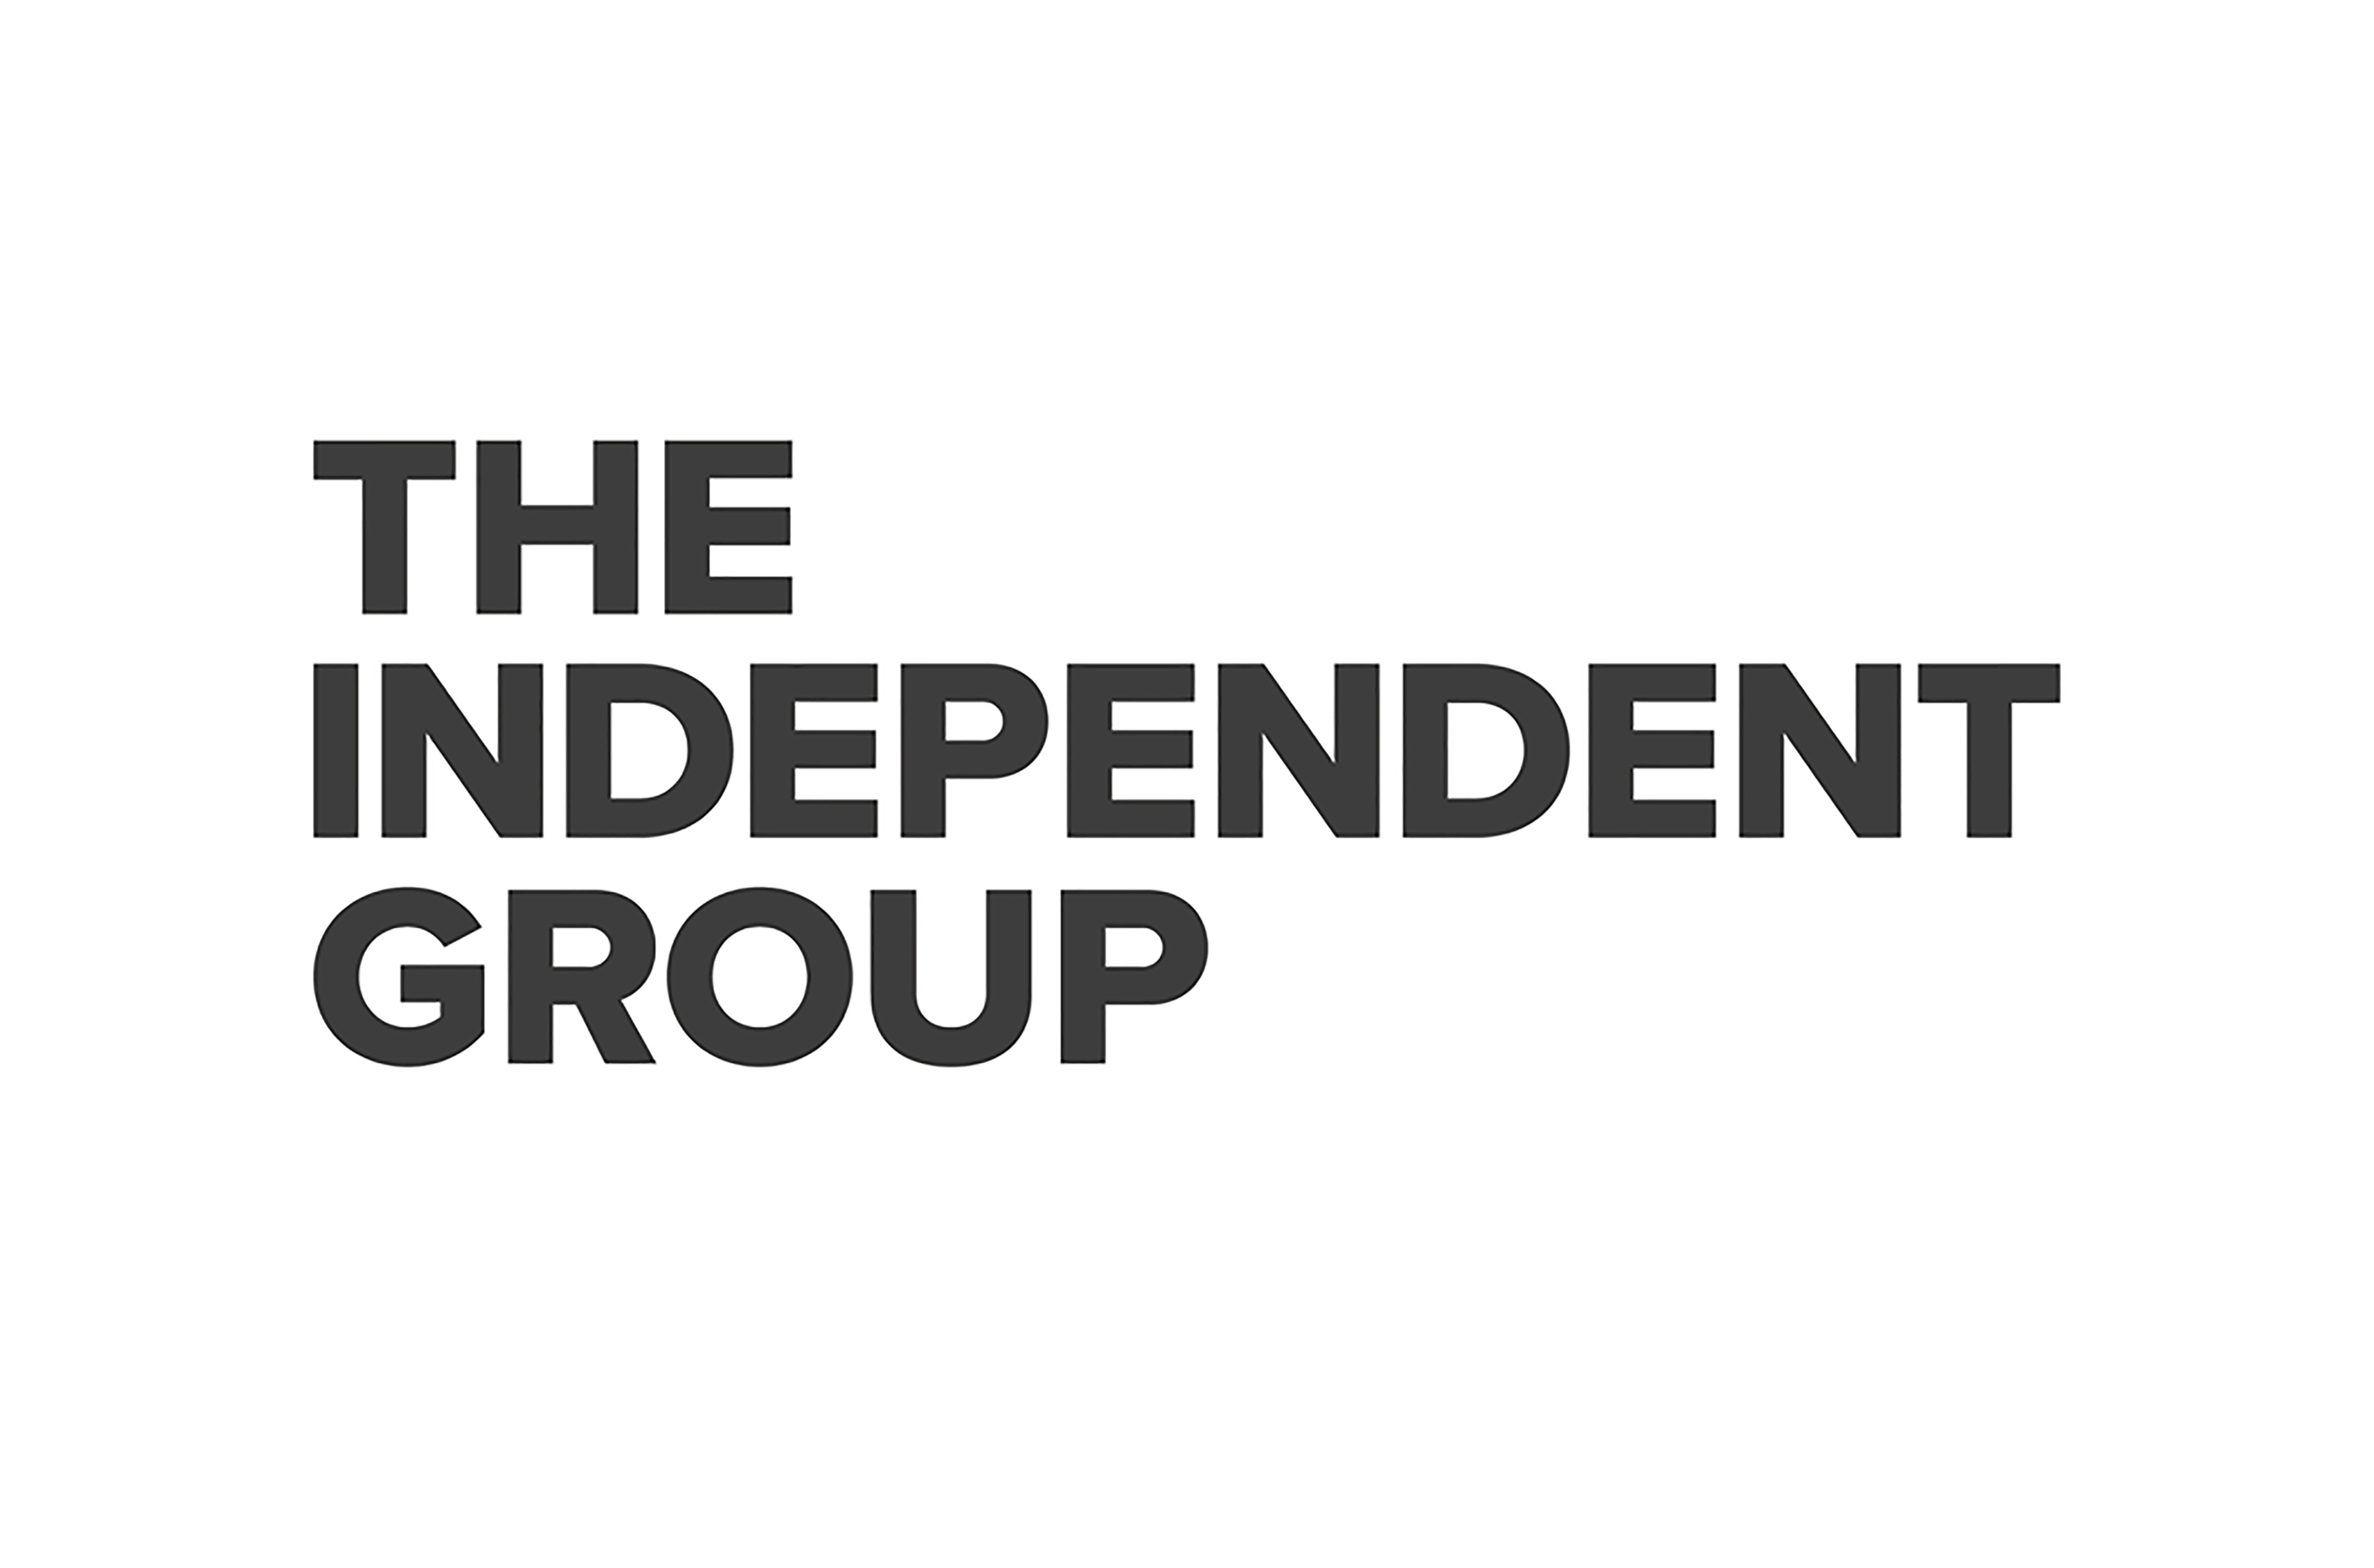 https://dailyelection.files.wordpress.com/2019/02/the-independent-group-logo-political-party.jpg